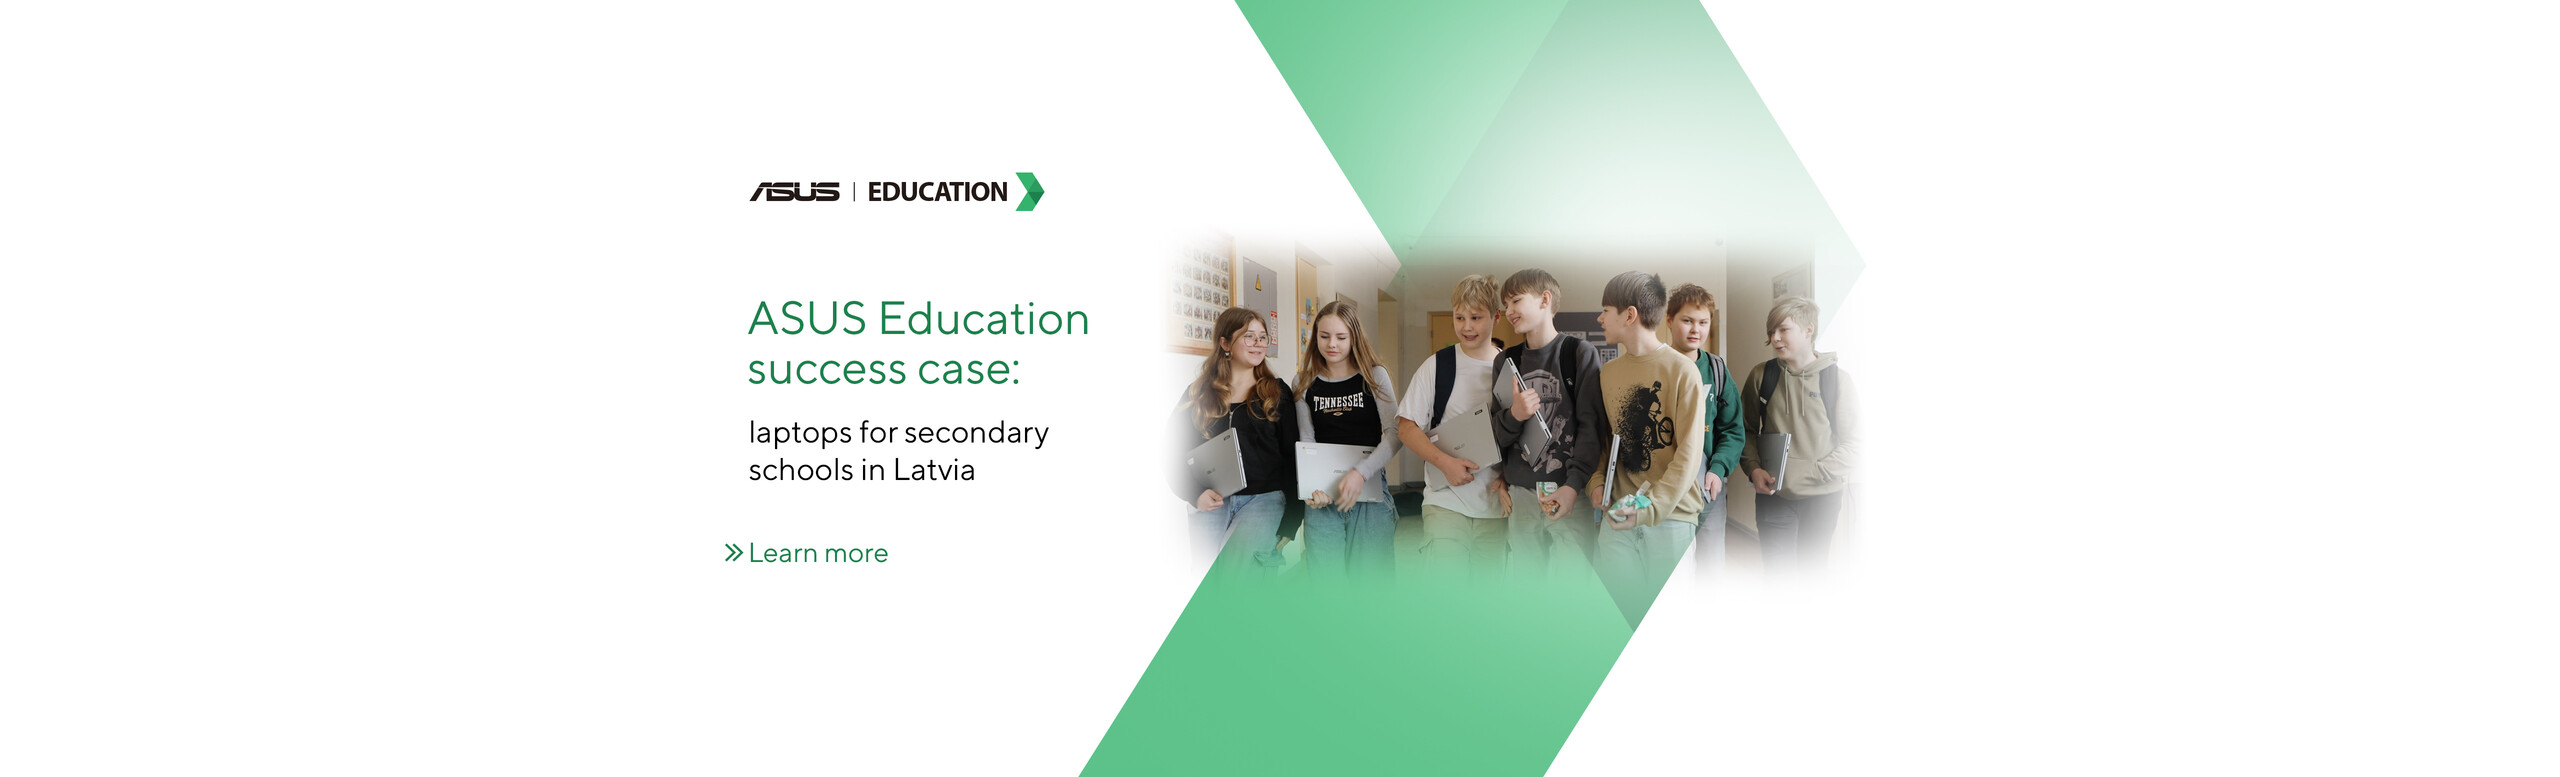 ASUS Education in Latvia ǀ ASUS laptops for secondary schools